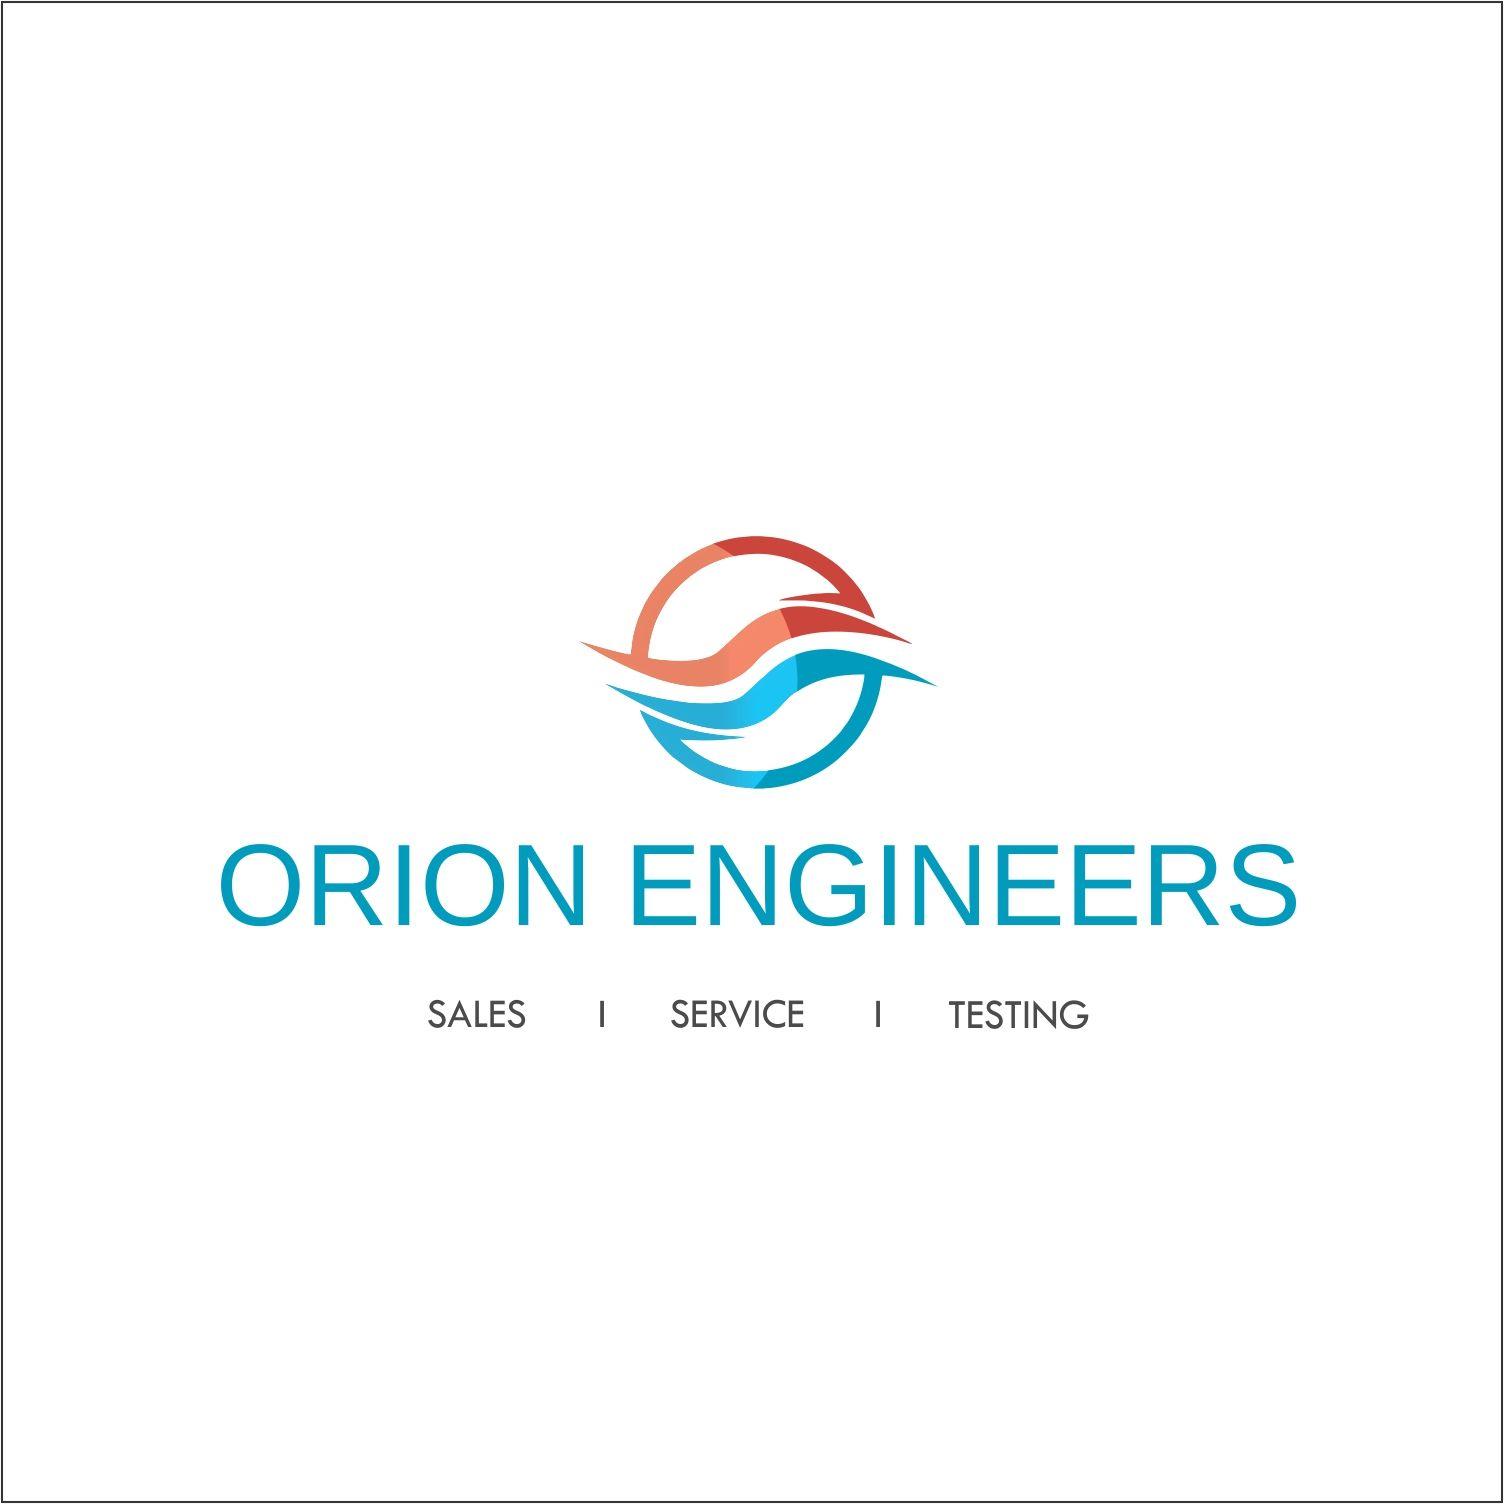 Orion Engineers